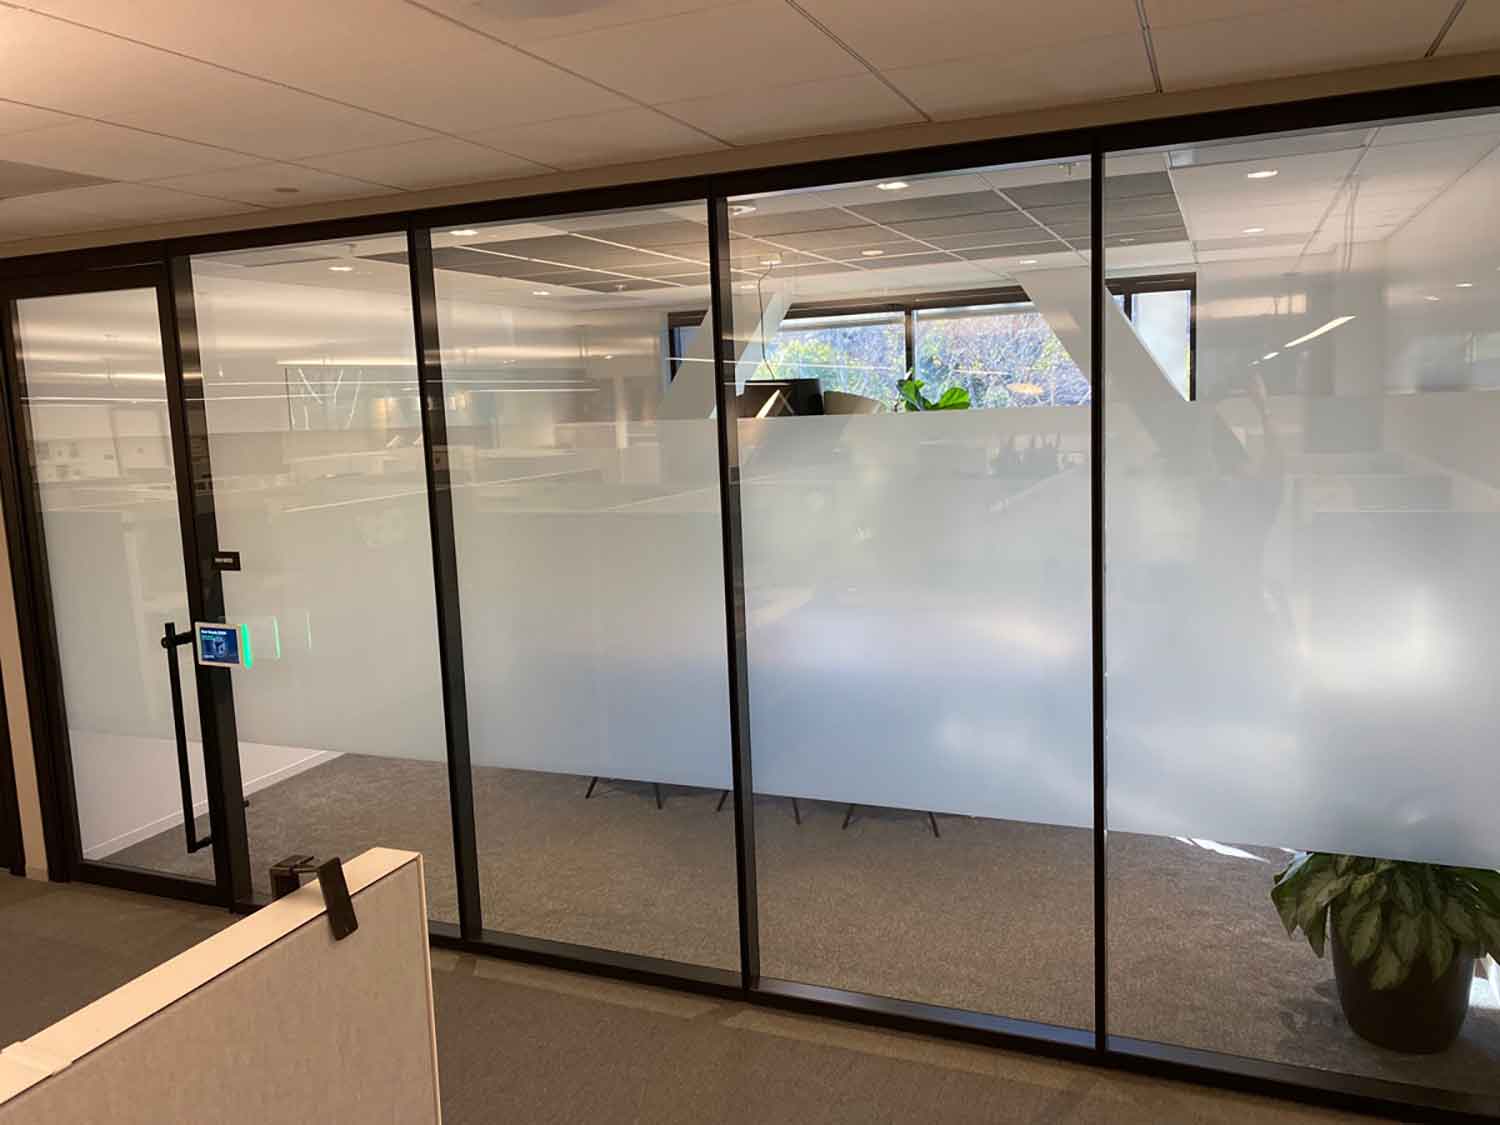 The ClimatePro team installed a band of 3M privacy window tint to this office in Novato, CA.